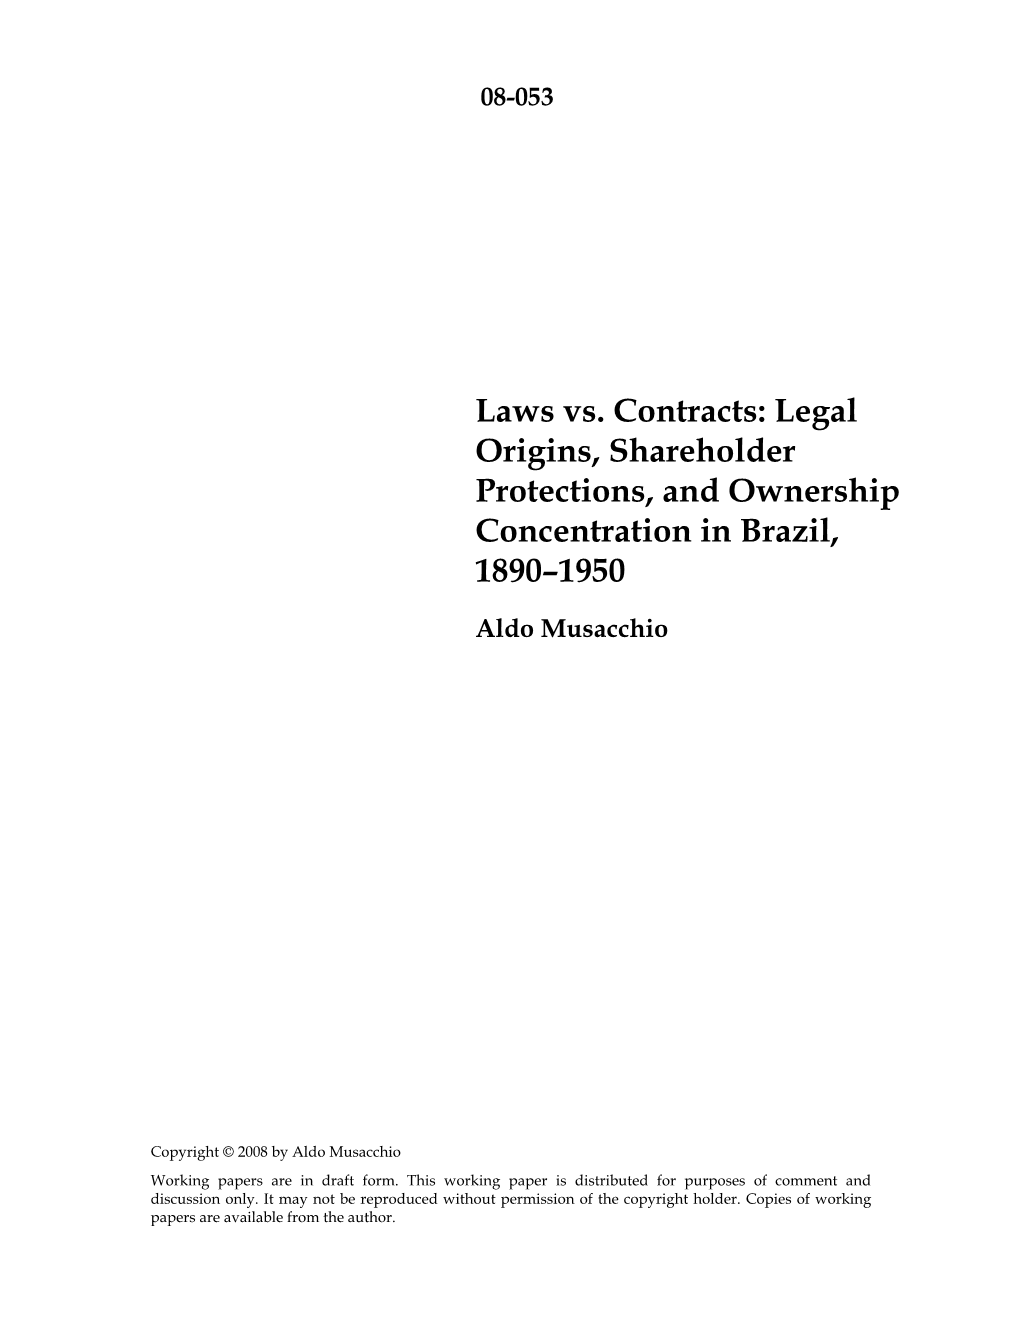 Laws Vs. Contracts: Legal Origins, Shareholder Protections, and Ownership Concentration in Brazil, 1890–1950